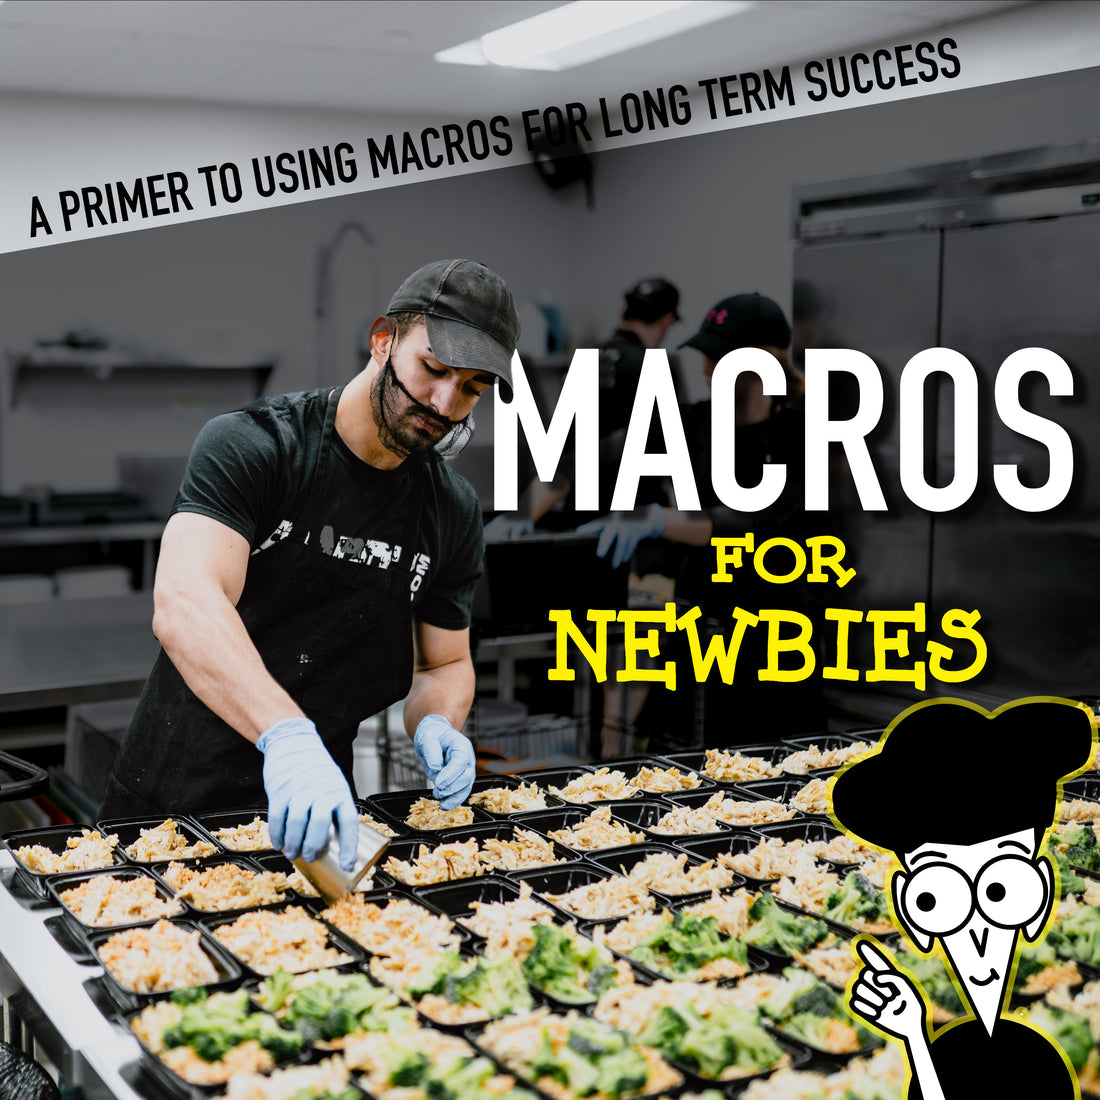 Macros for Newbies: The Importance of Macronutrients for Your Health